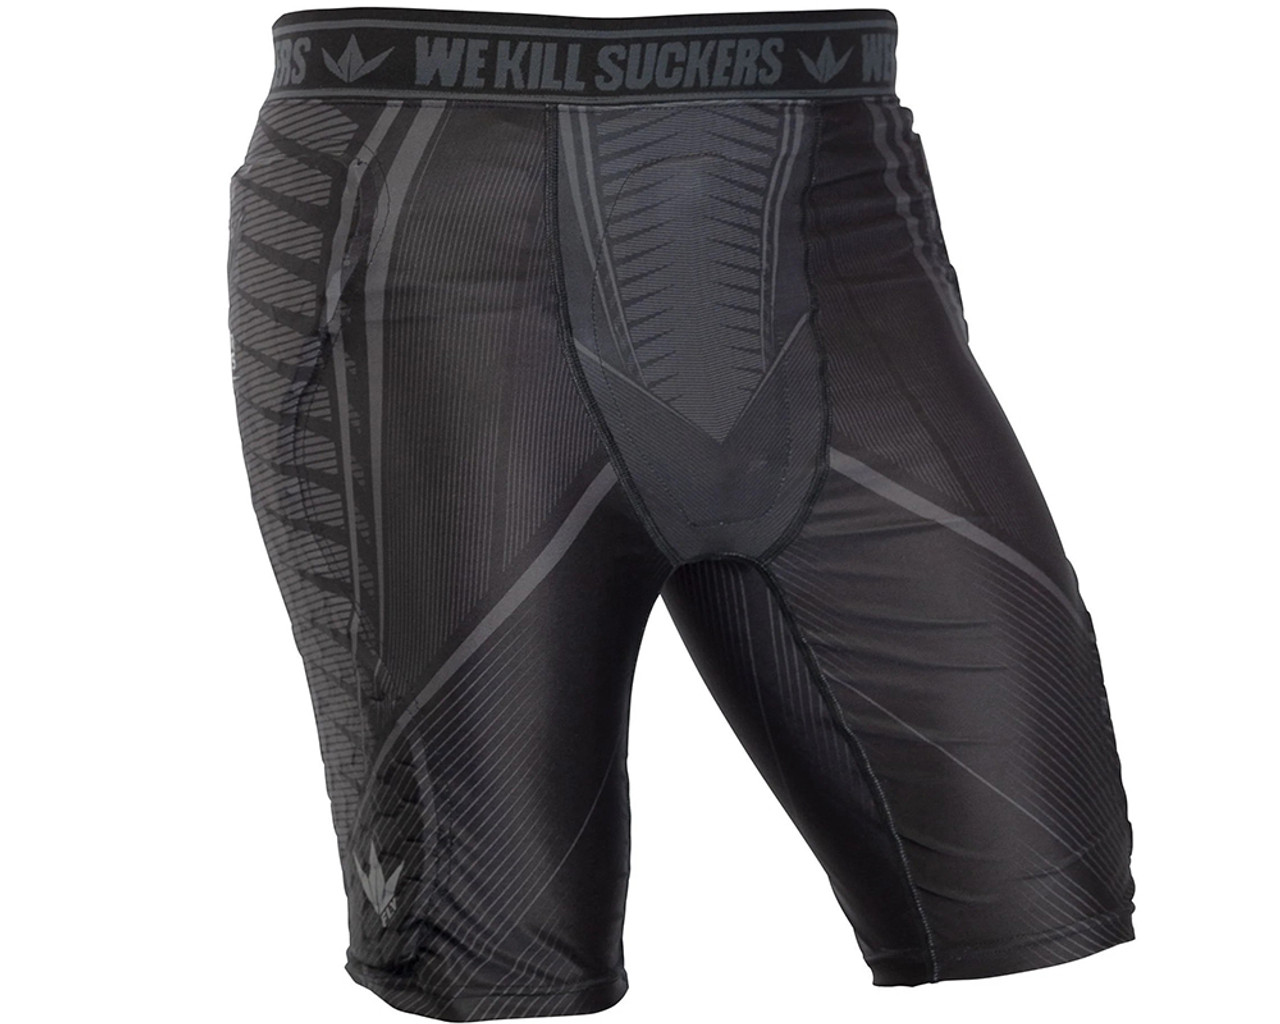 Bunkerkings Fly Paintball Compression Shorts - Black